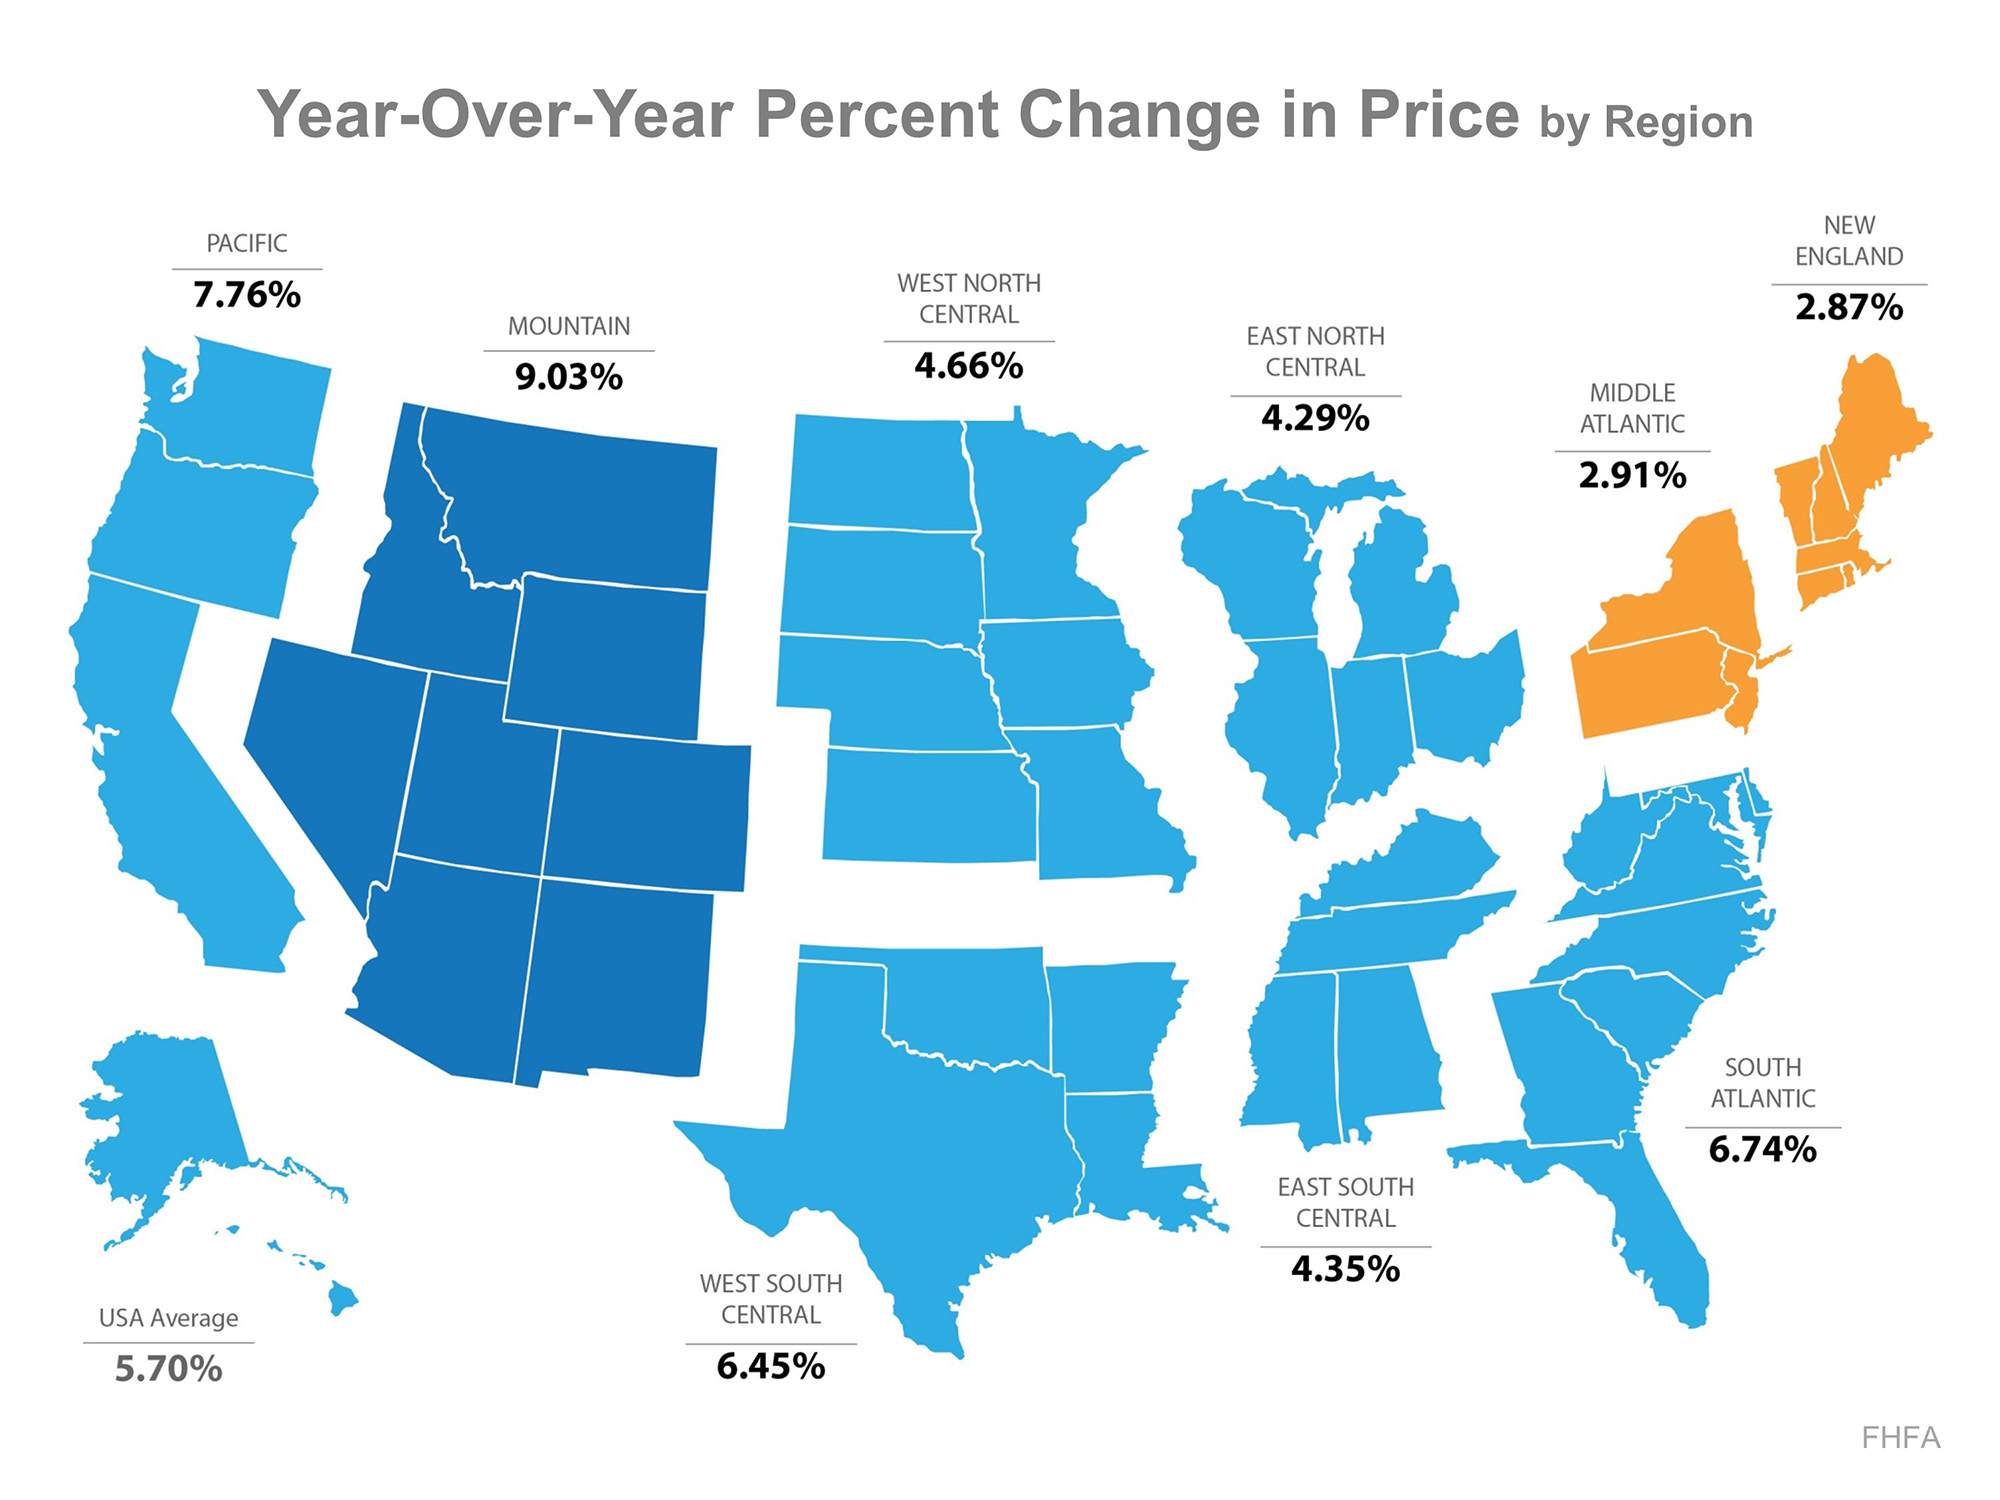 YOY expected price changes 2016